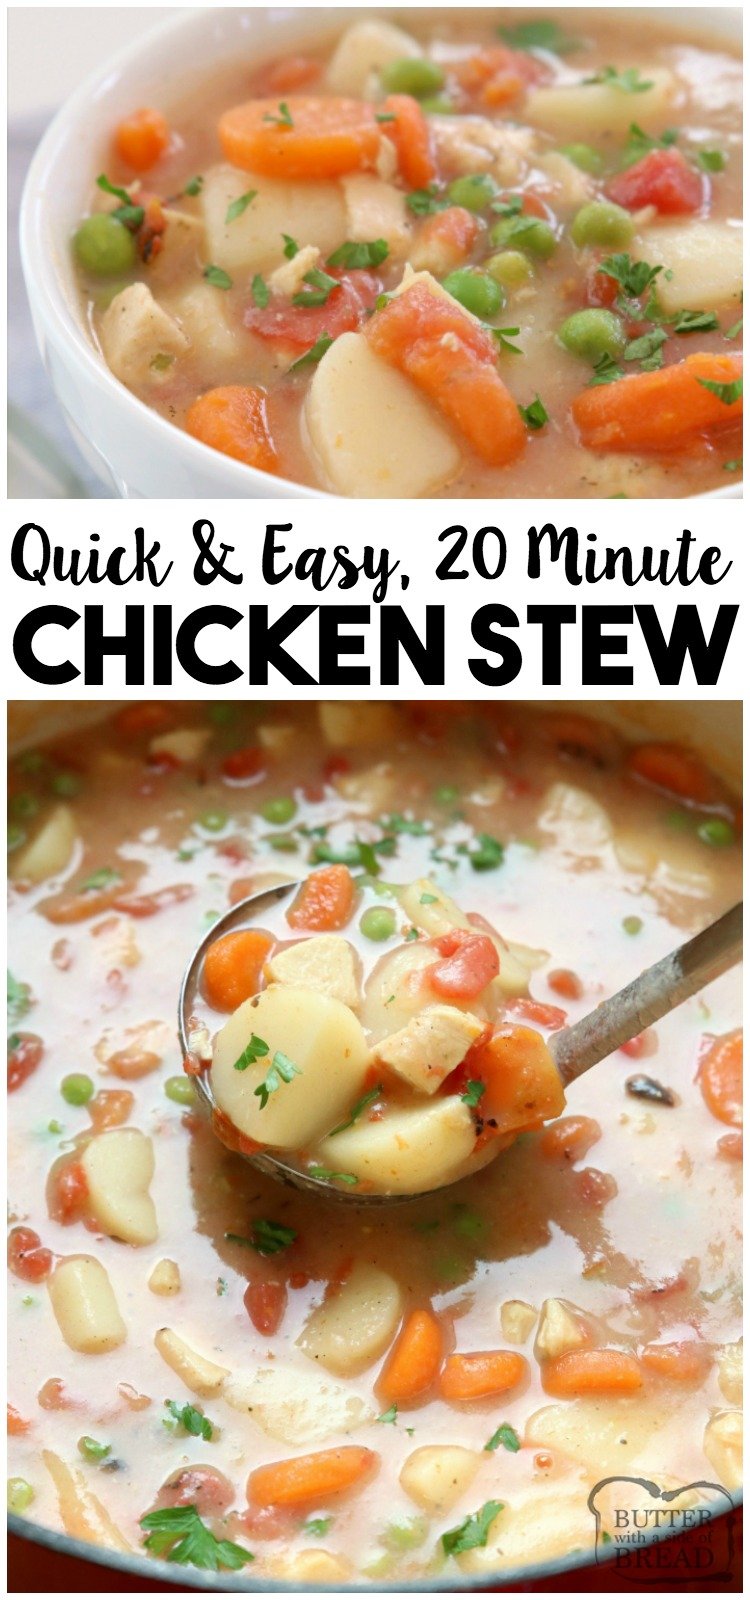 20-Minute Chicken Stew recipe, perfect for busy nights! Hearty stew with tender chicken & vegetables that comes together fast and tastes wonderful. #chicken #stew #recipe #dinner #chickenstew #chickenrecipe #chickendinner #food #comfortfood from BUTTER WITH A SIDE OF BREAD